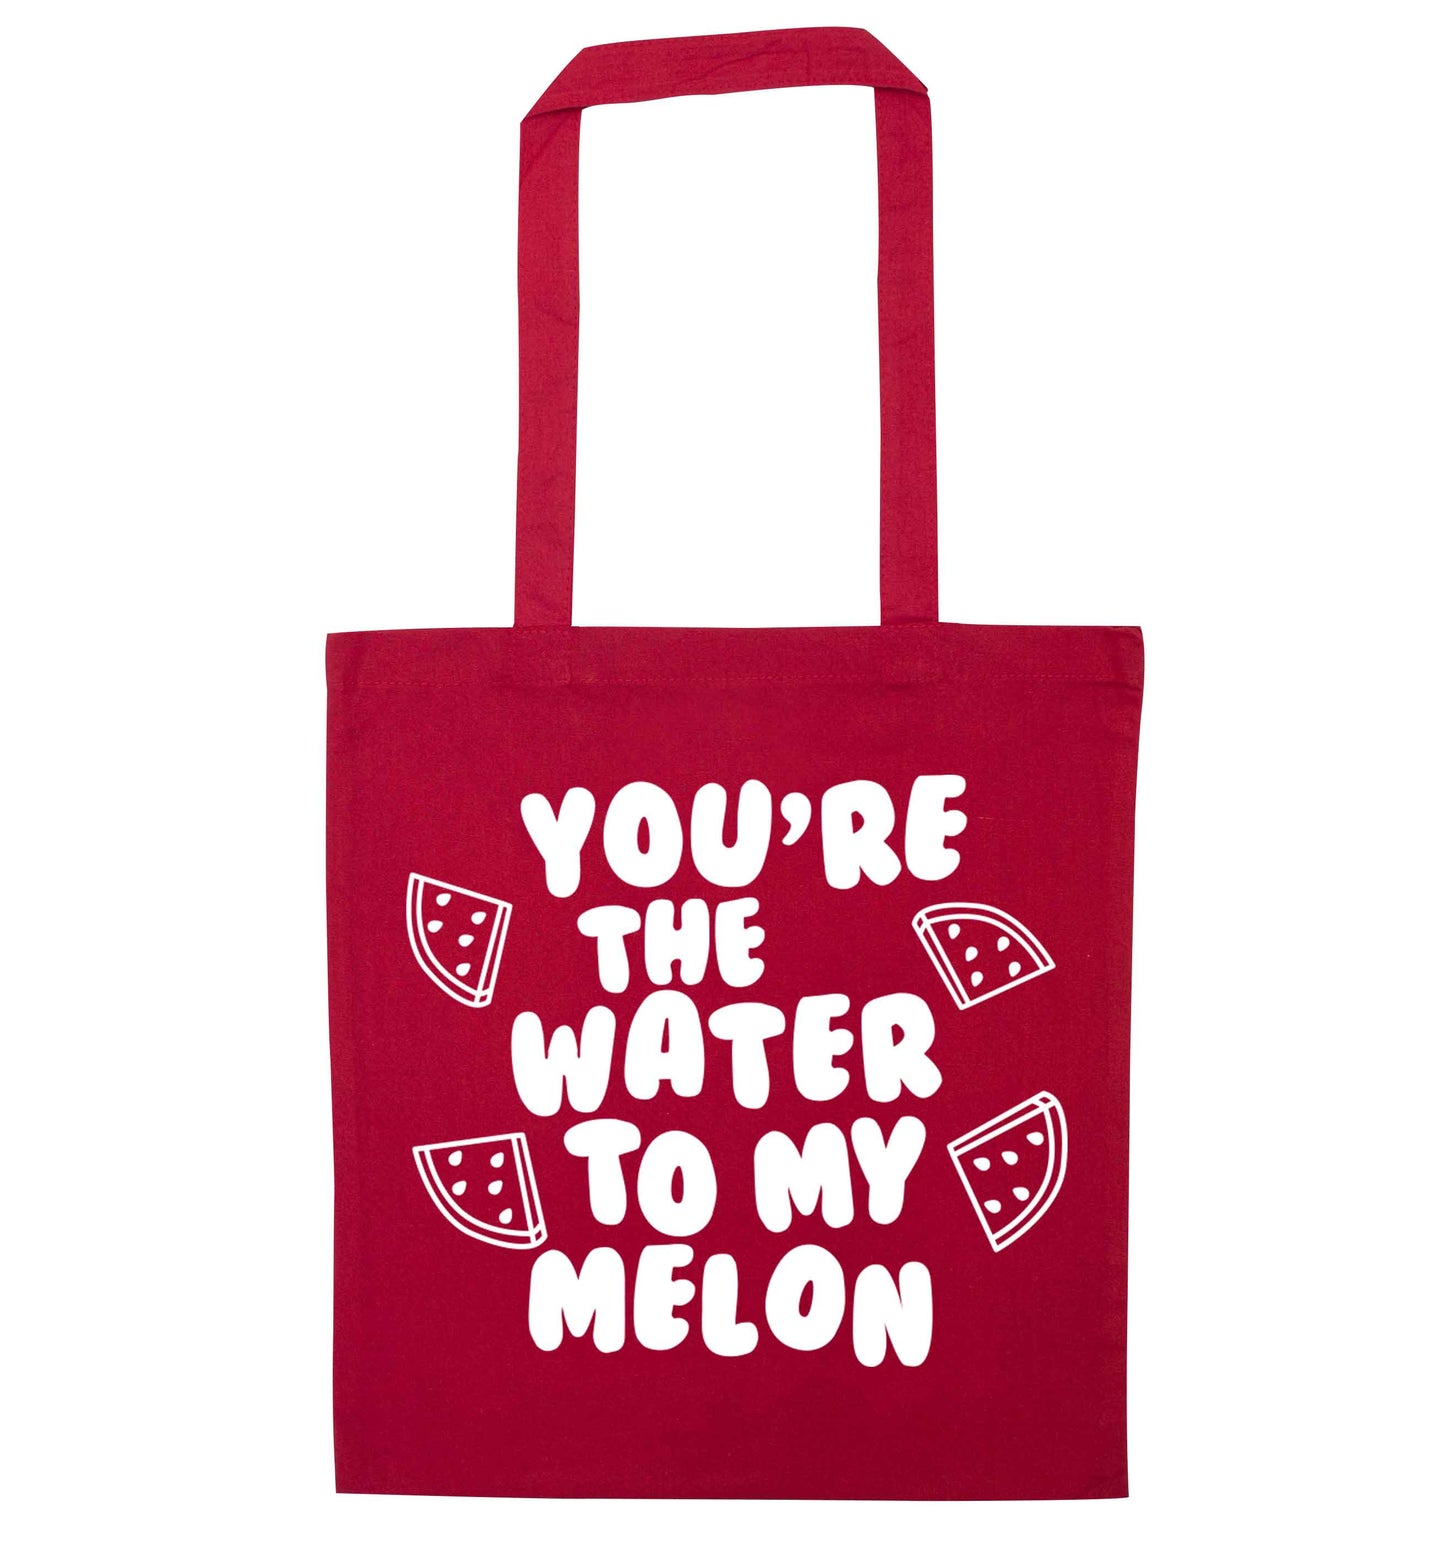 You're the water to my melon red tote bag